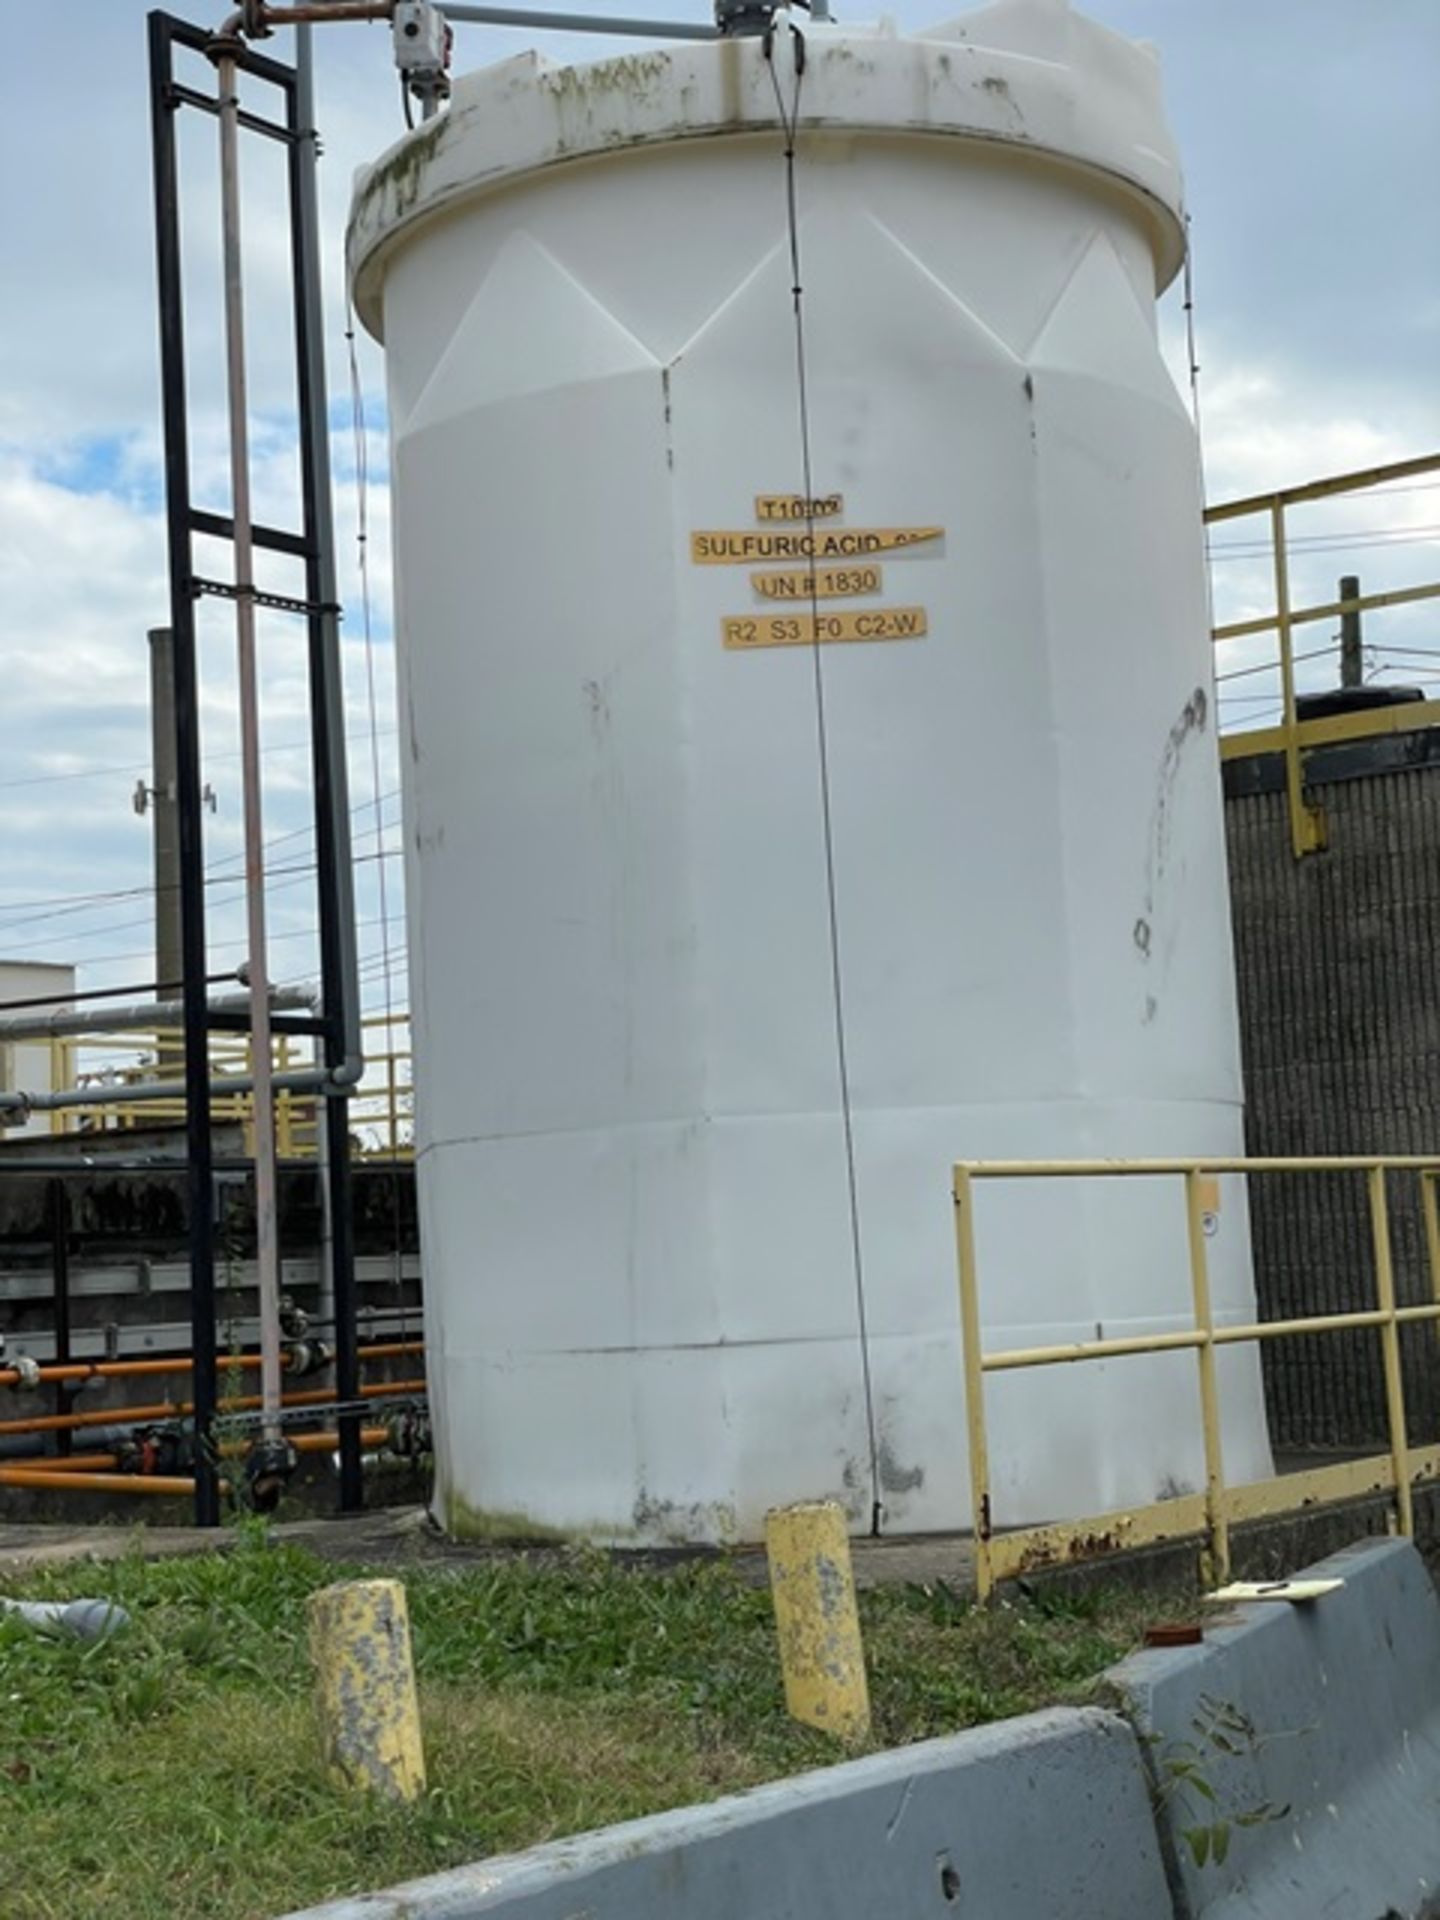 Sulfuric Acid Tank, Approx. 9' Dia. X 15', Poly Construction, Rigging & Loading Fee: $900